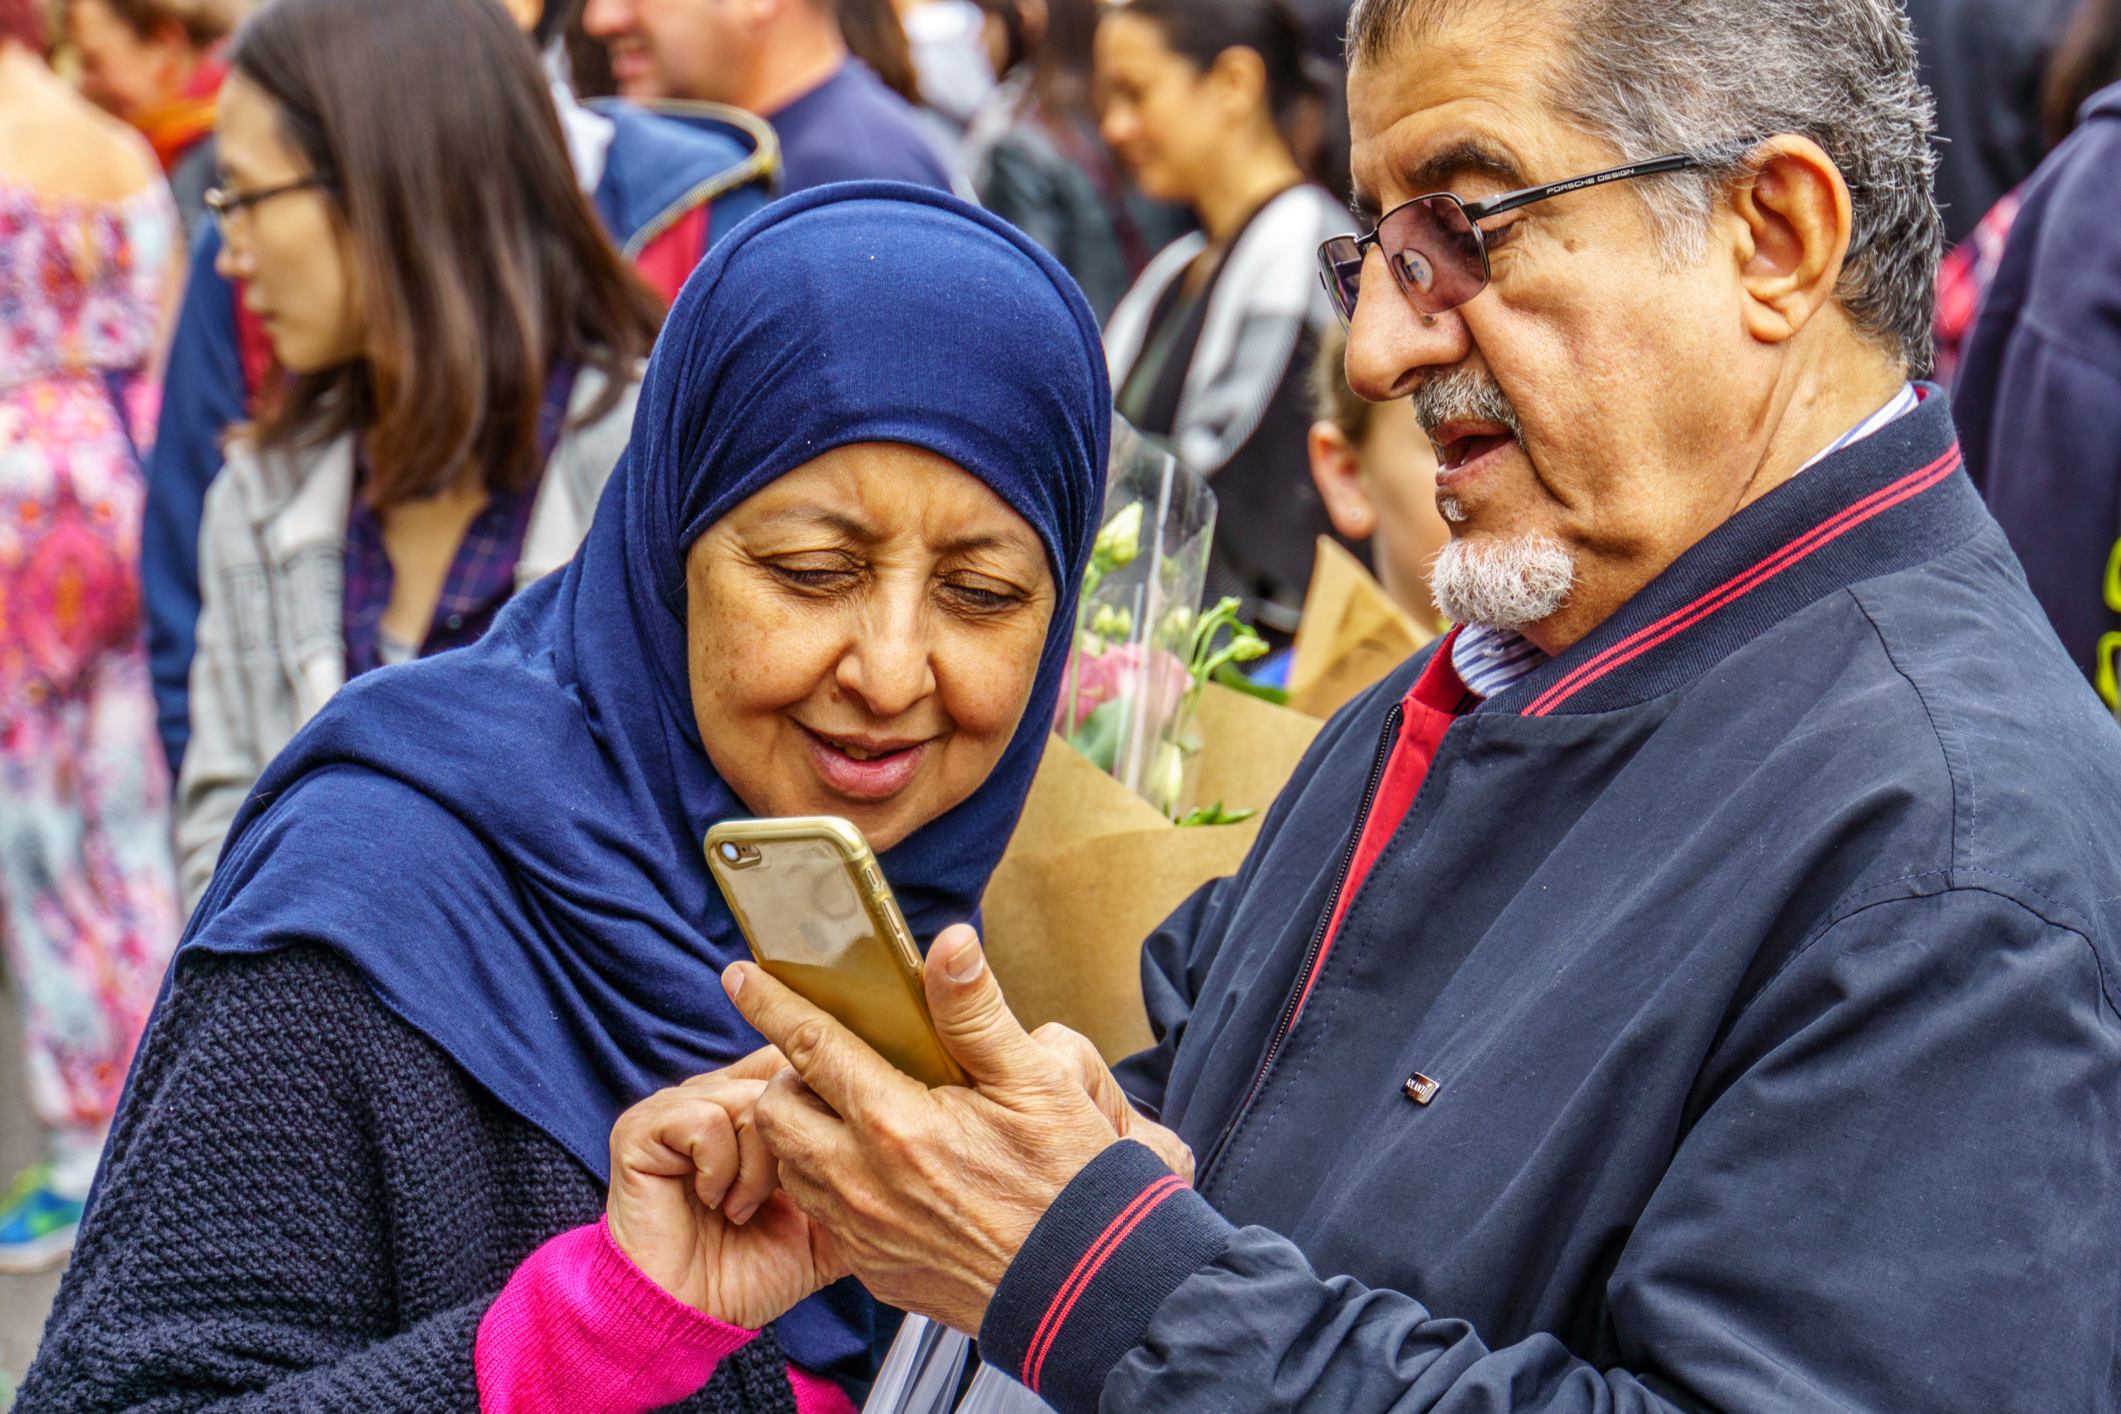 Learn more about bringing Zakat to life where you live